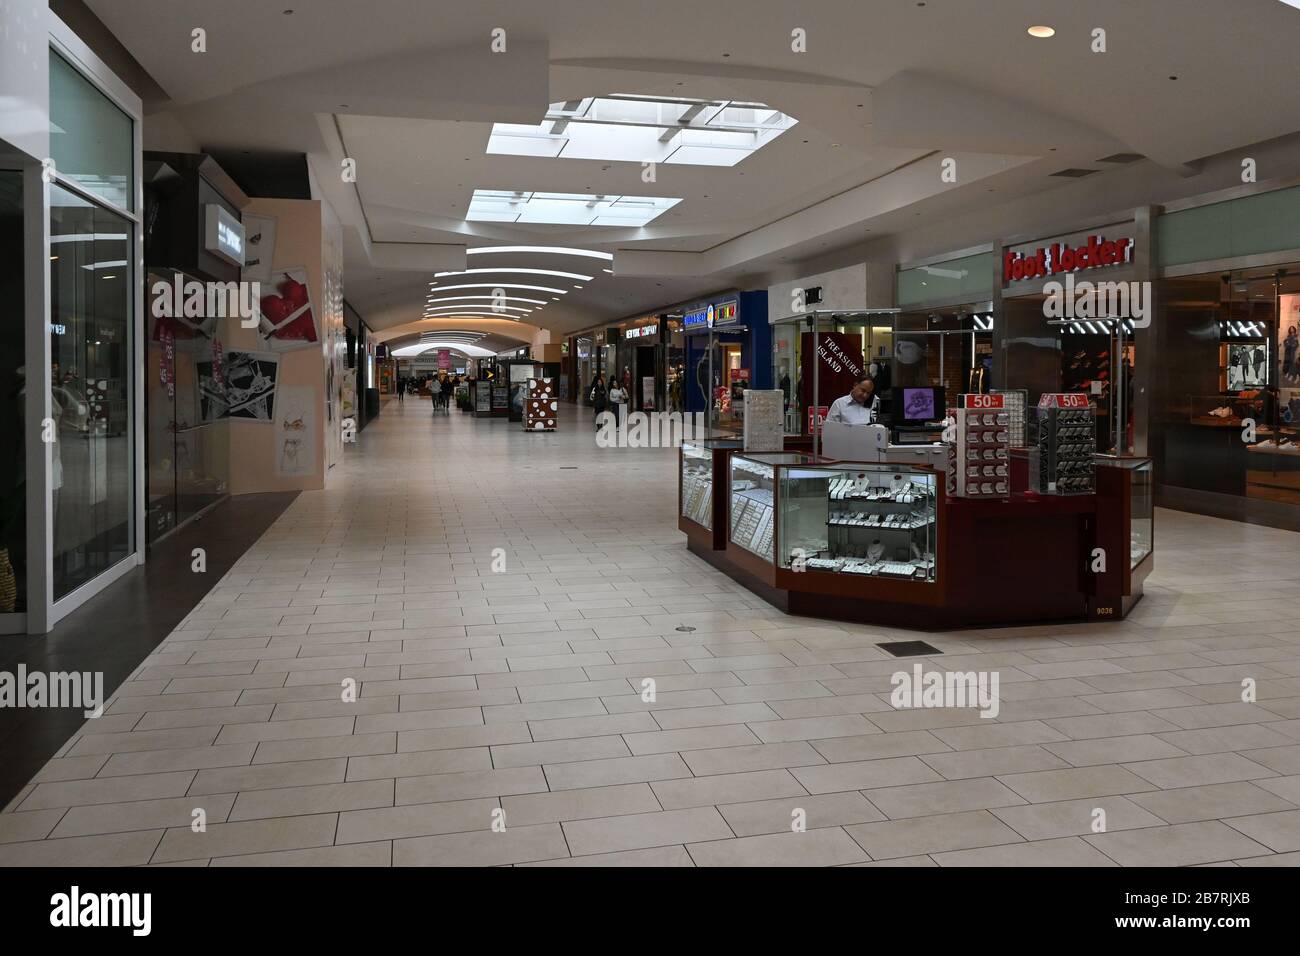 Cerritos, United States. 17th Mar, 2020. General overall view of the deserted Los Cerritos Center mall, Tuesday, March 17, 2020, in Cerritos, Calif. The shopping center has reduced hours and stores have closed because of the coronavirus COVID-19 pandemic outbreak. Photo via Credit: Newscom/Alamy Live News Stock Photo